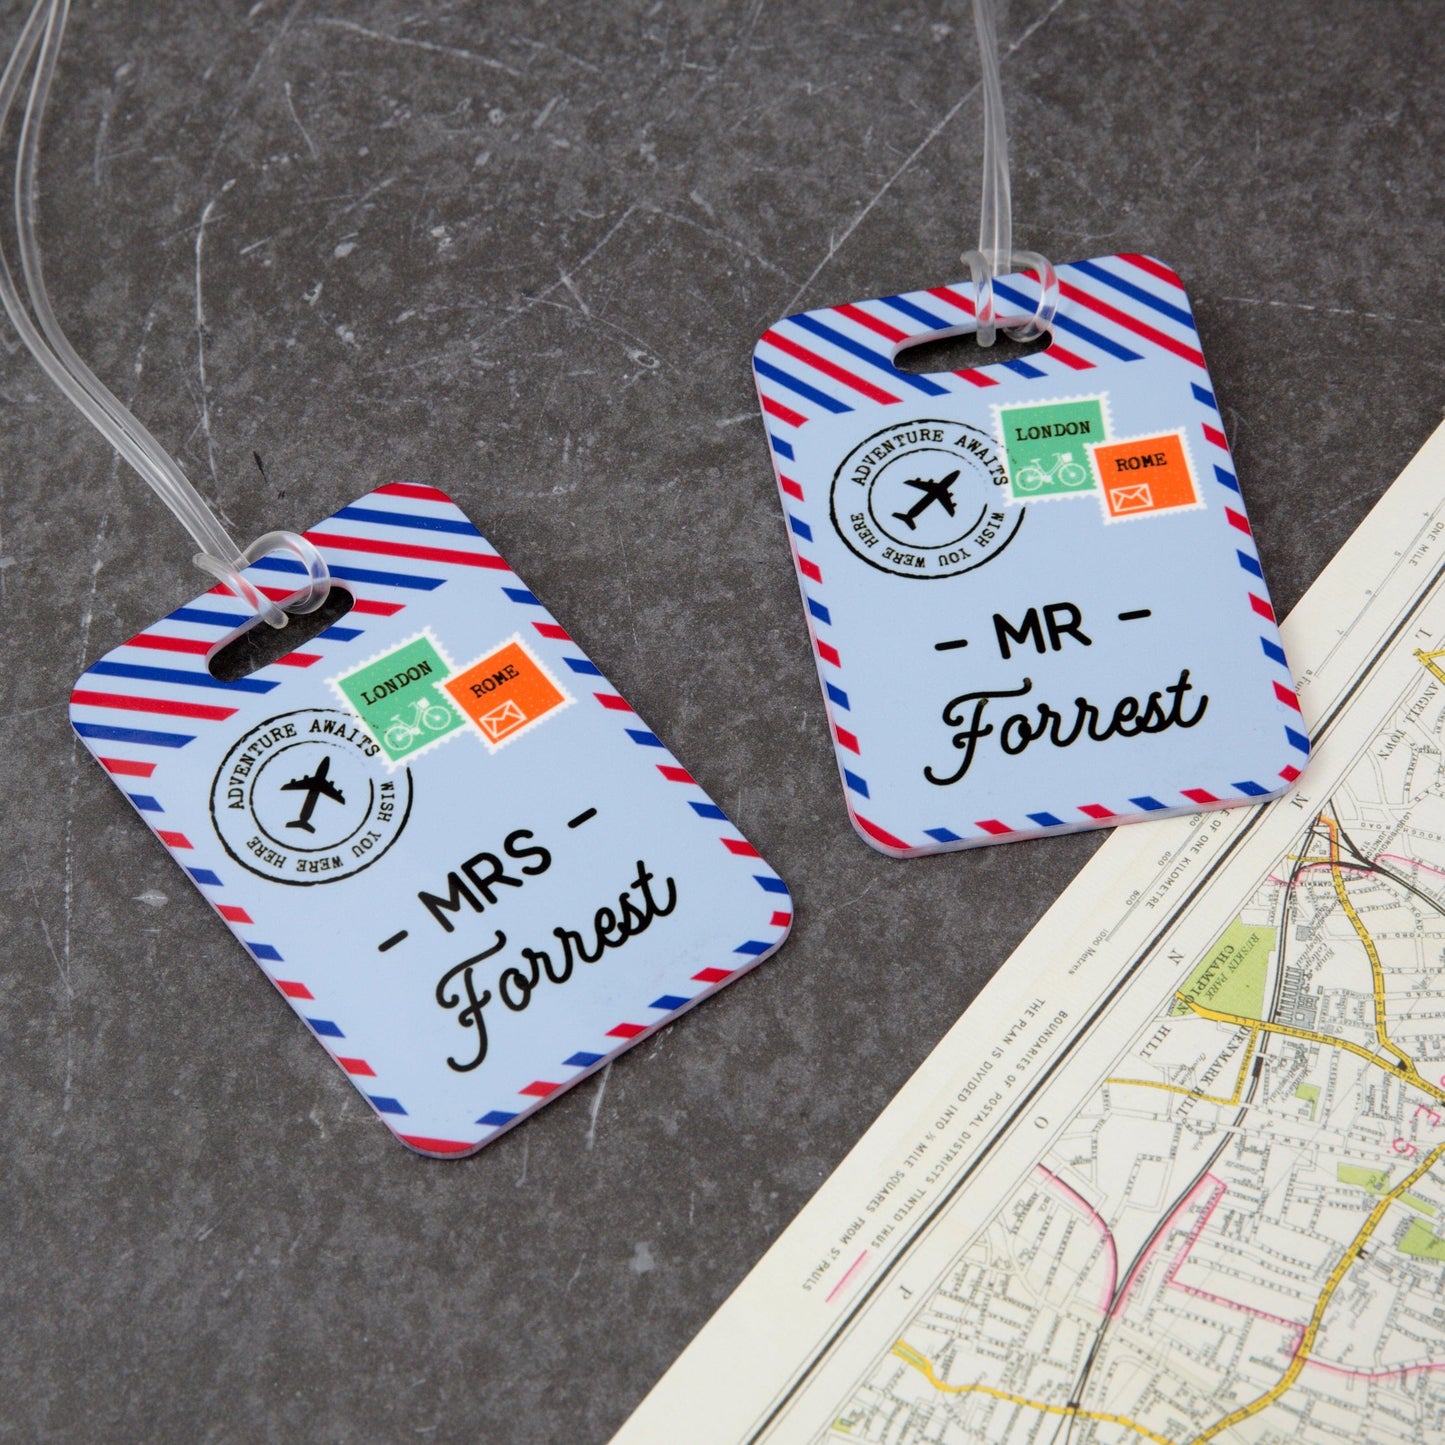 Honeymoon Wedding Gift - Vintage Airmail Stamp Inspired Luggage Tags - Travel Or Leaving Present